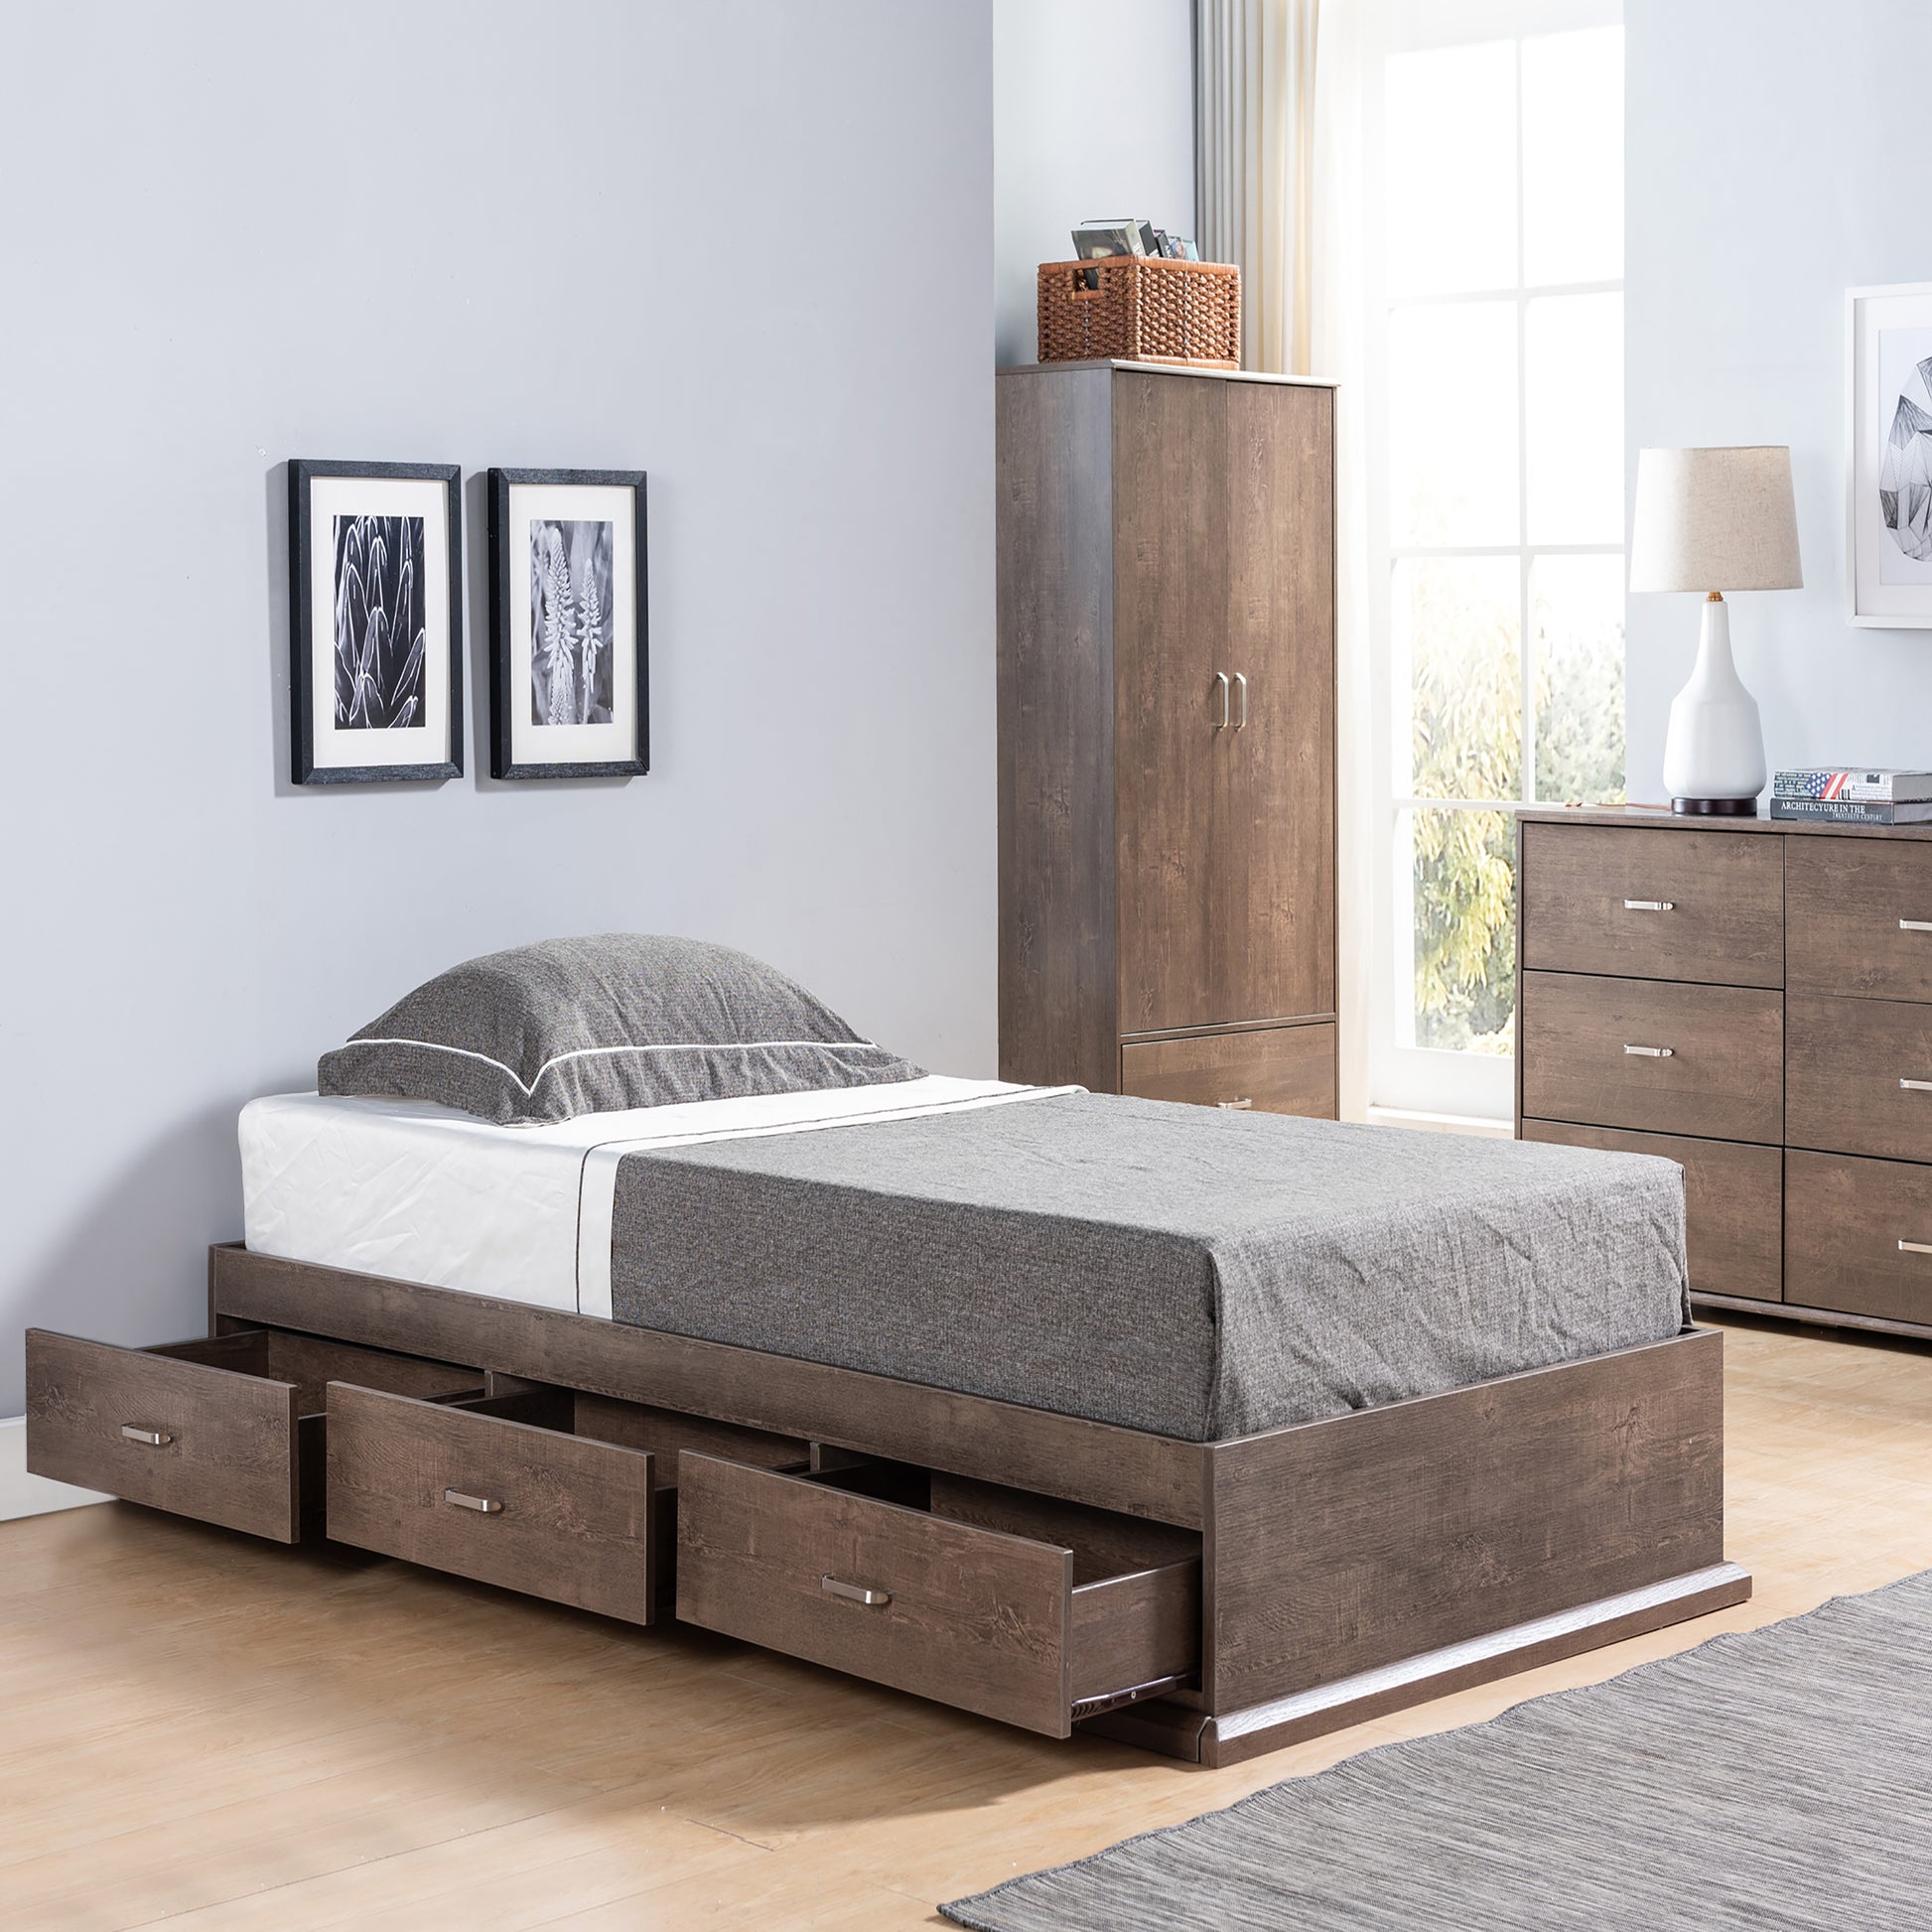 Right angled contemporary walnut three-drawer platform storage bed with drawers open in a bedroom with accessories